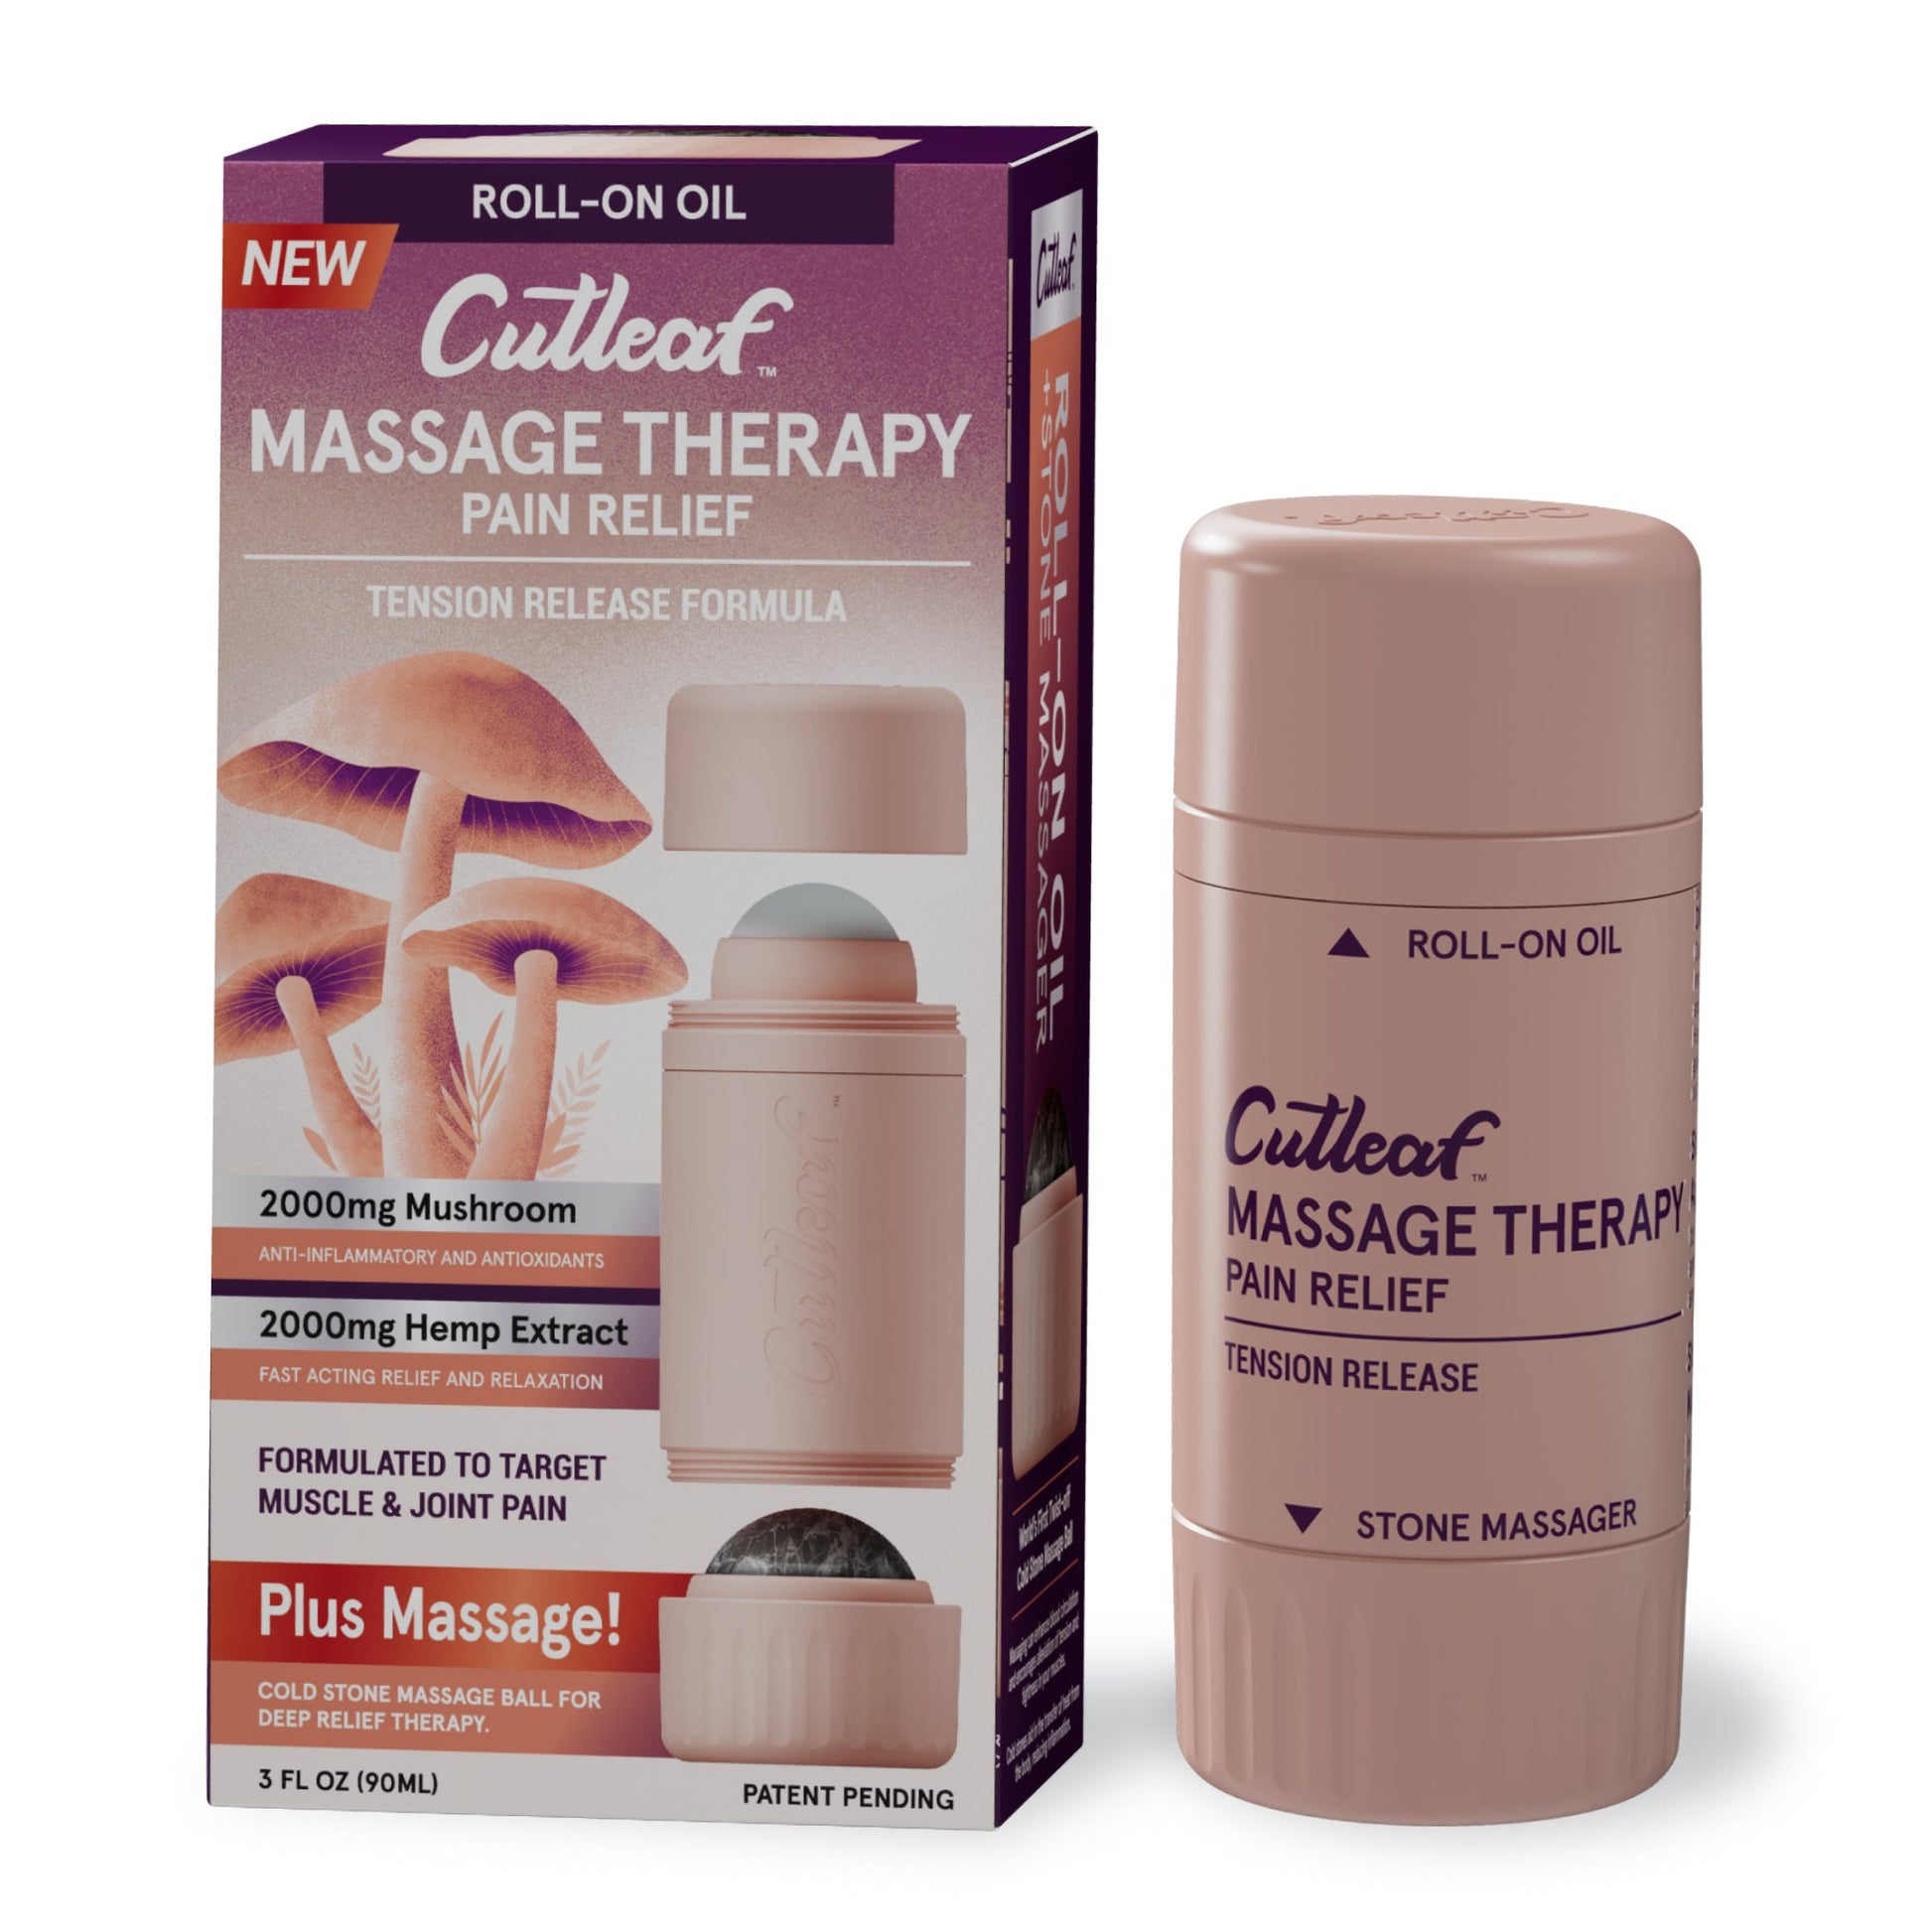 Cutleaf Massage Therapy Roll-On Blend for massage therapy